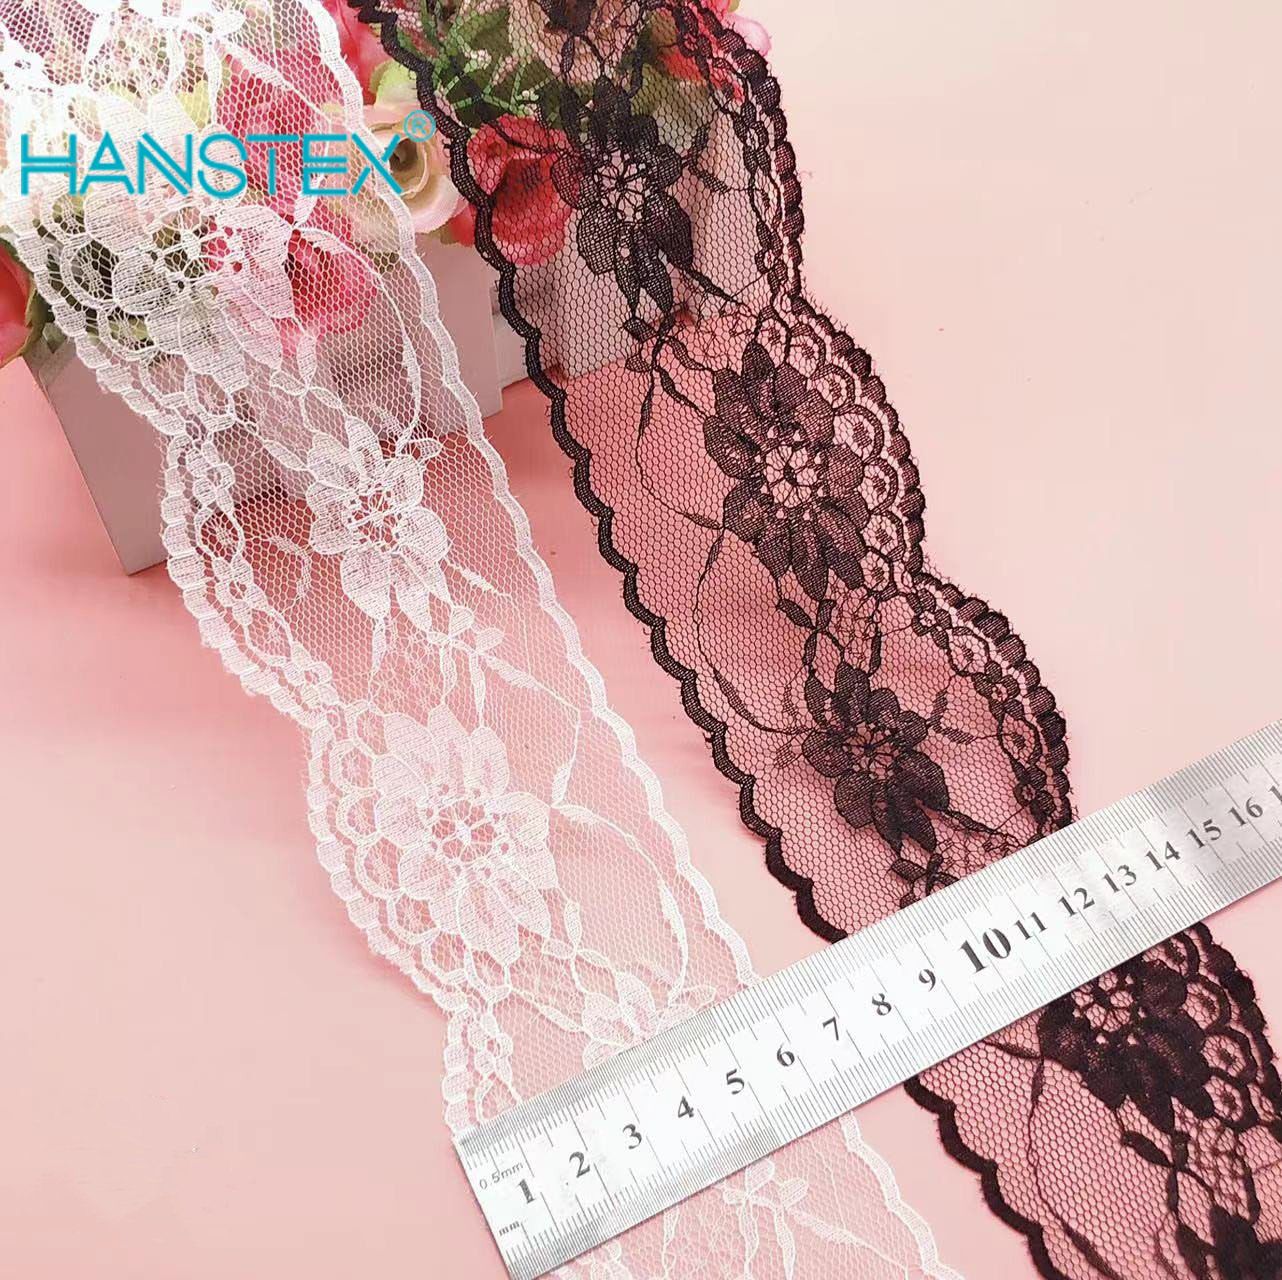 Polyester Polyester No Elastic Lace Trimming Lace Fabric Fringe